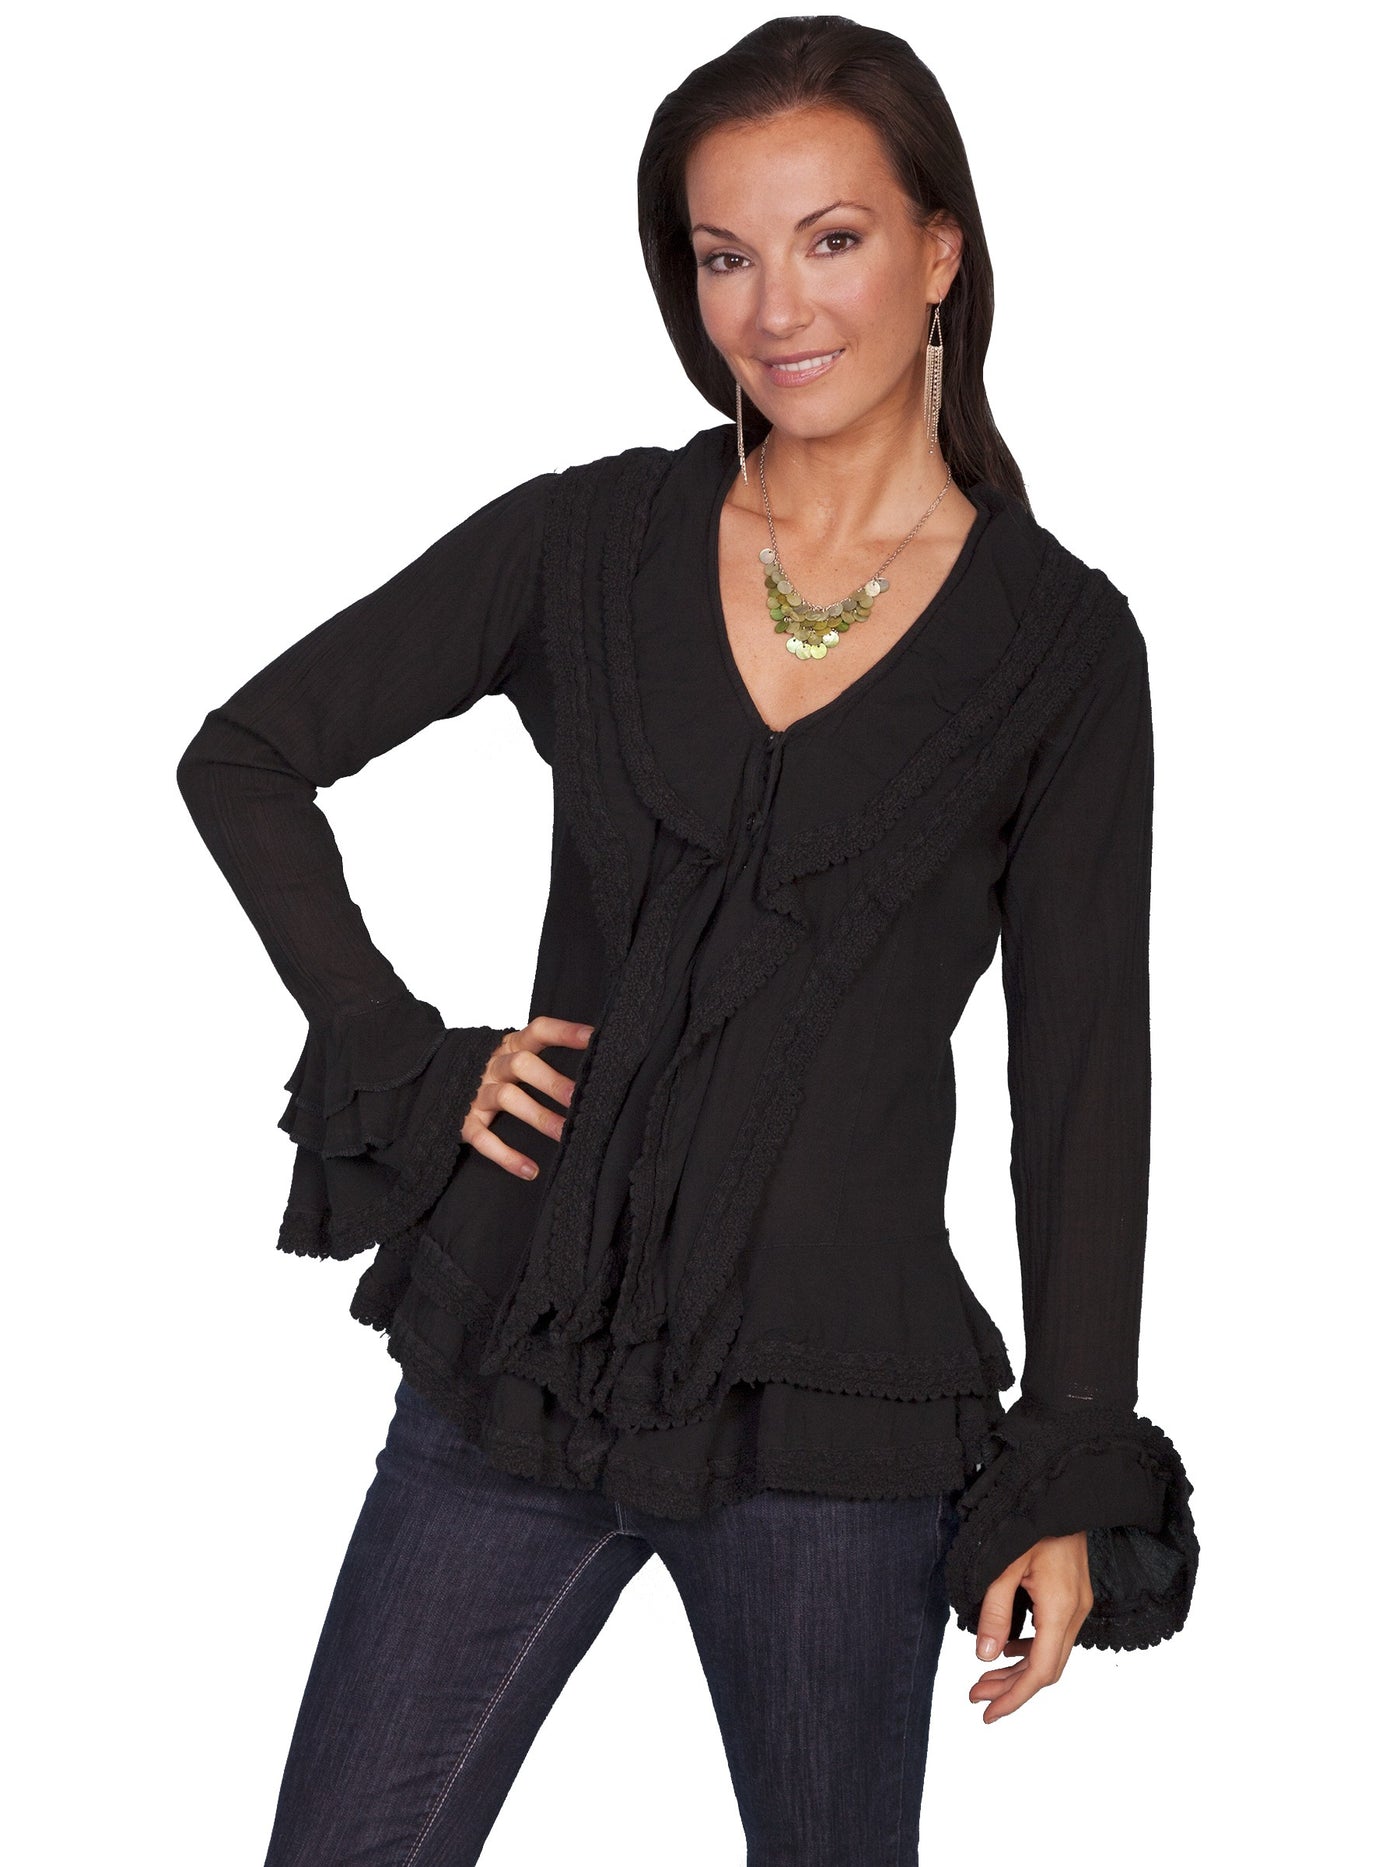 Caribbean Breeze Cotton Blouse in Black - SOLD OUT